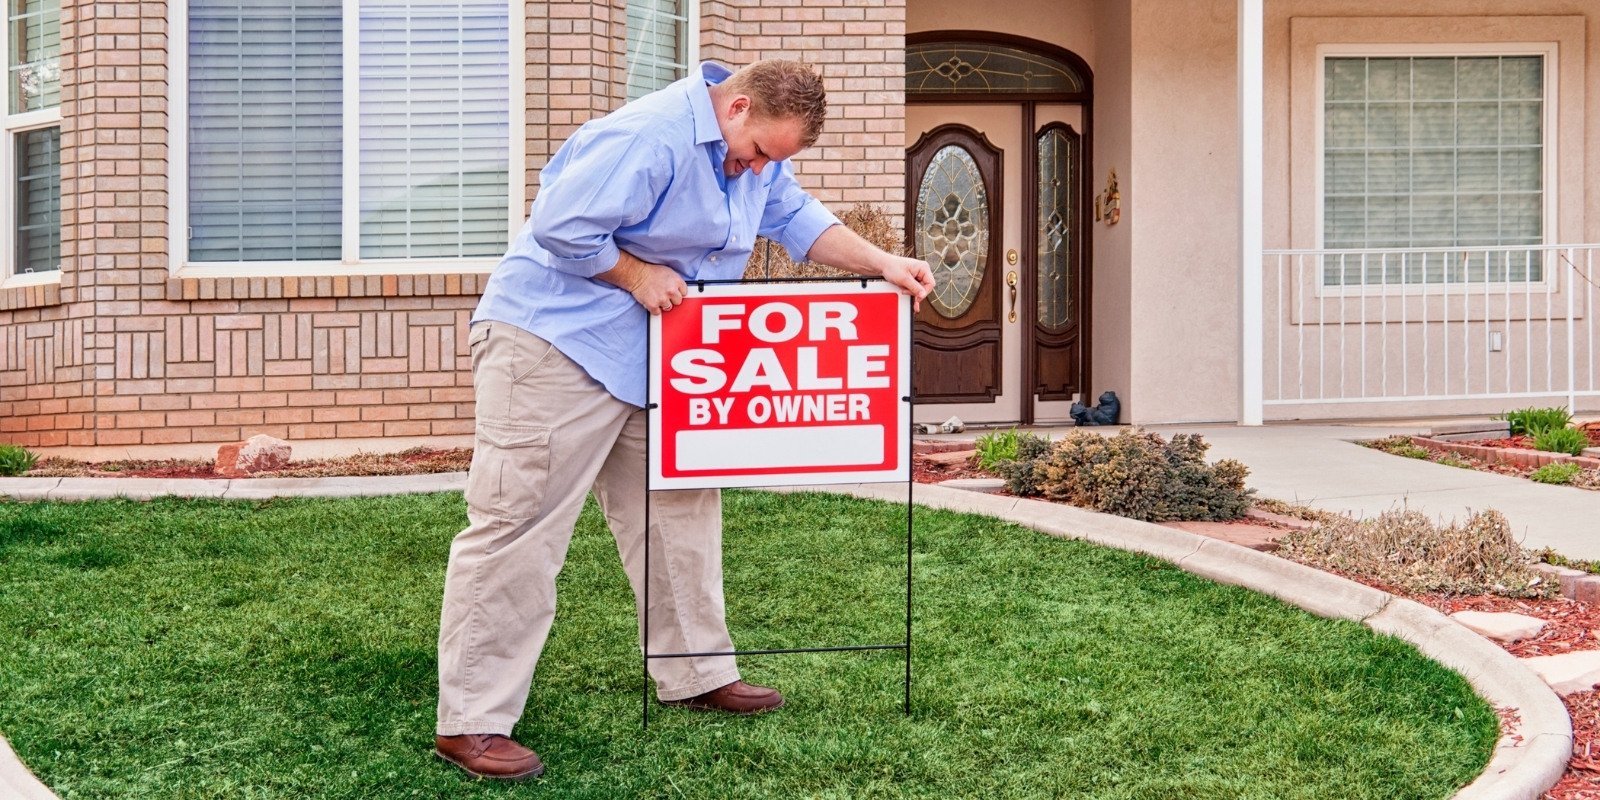 Man placing a For Sale By Owner sign in front yard